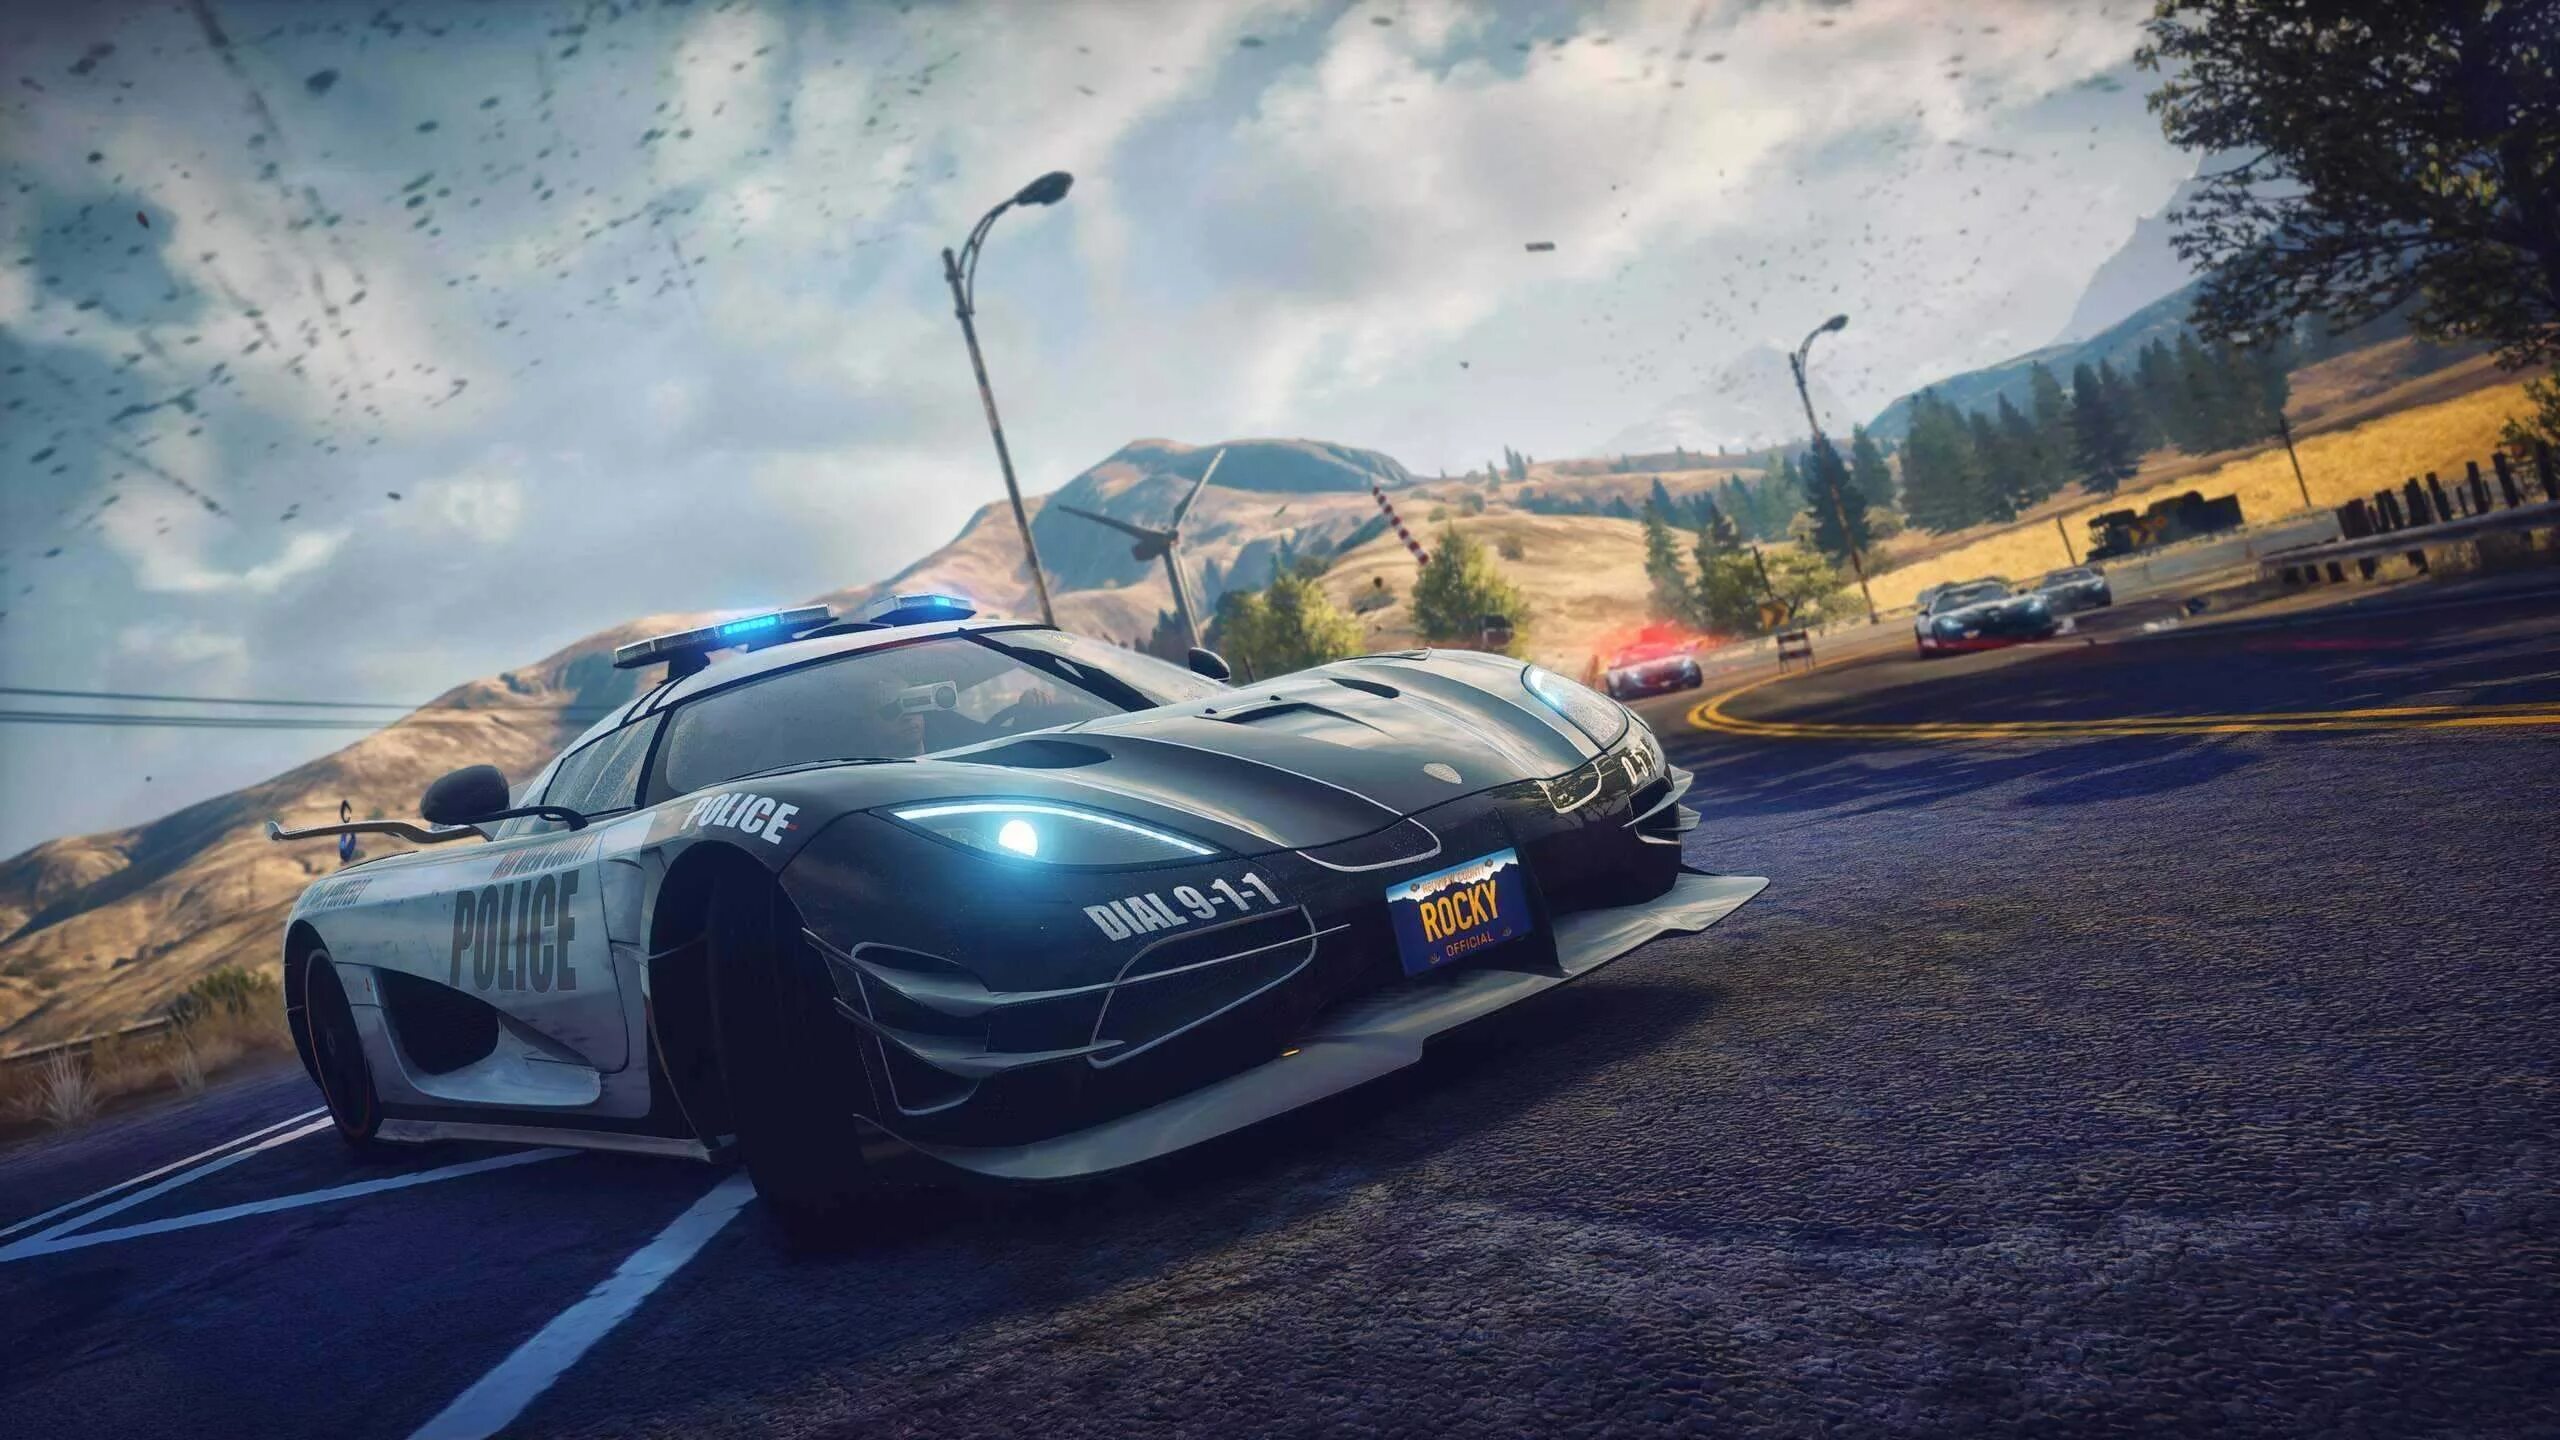 Need for Speed Rivals. Need for Speed ривалс. Rivals, NFS 2015. Игры гонки нид фор спид